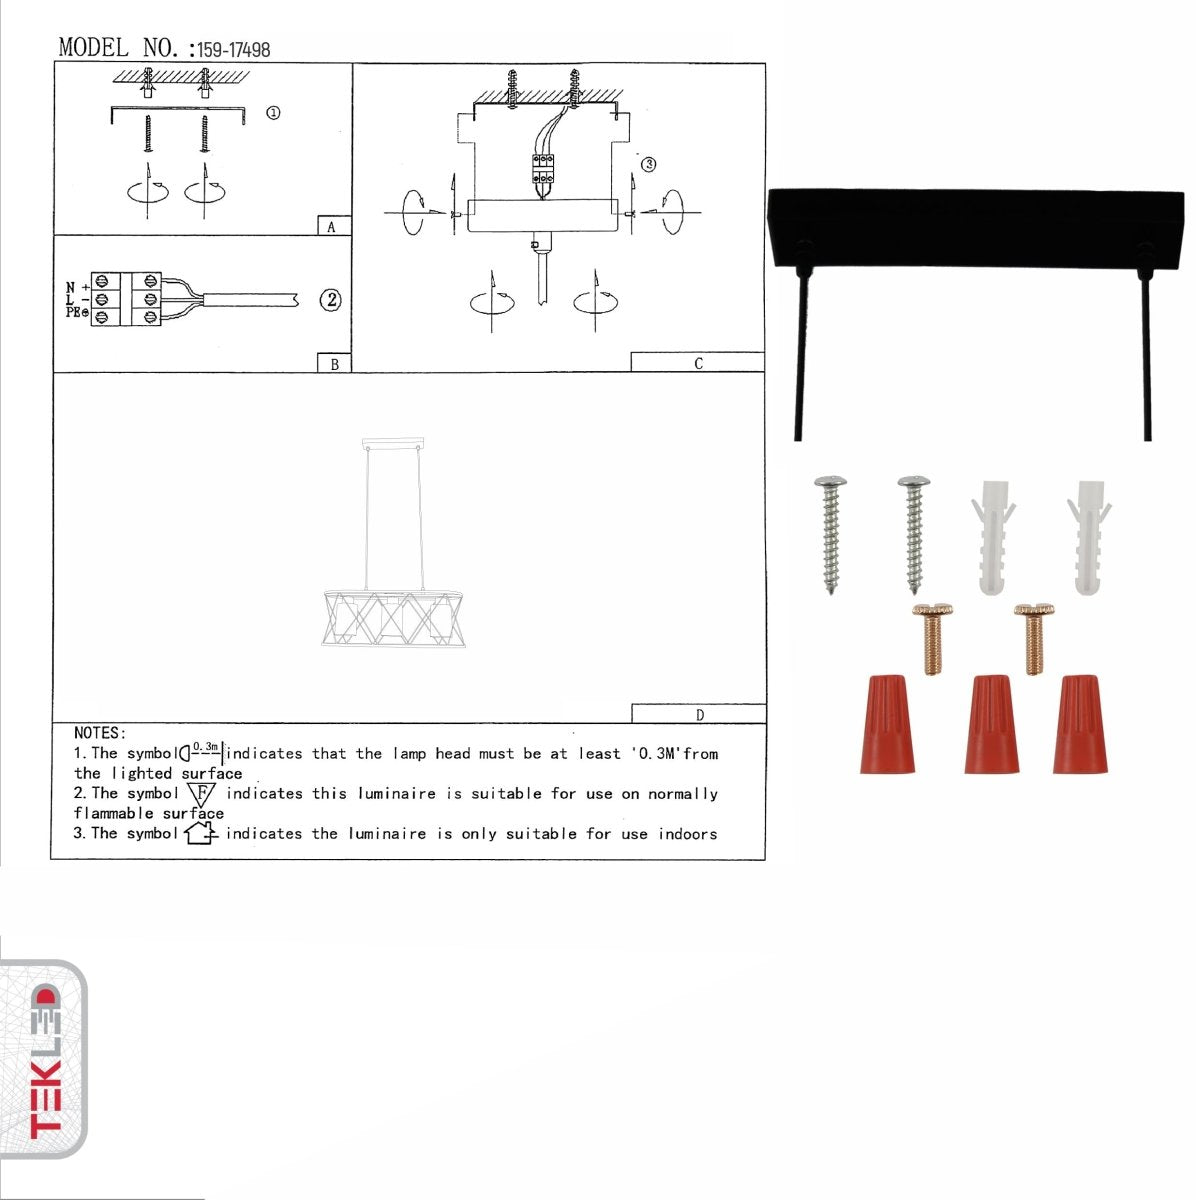 User manual for Black Cage Metal Amber Cylinder Glass Island Chandelier with 3xE27 Fittings | TEKLED 159-17498